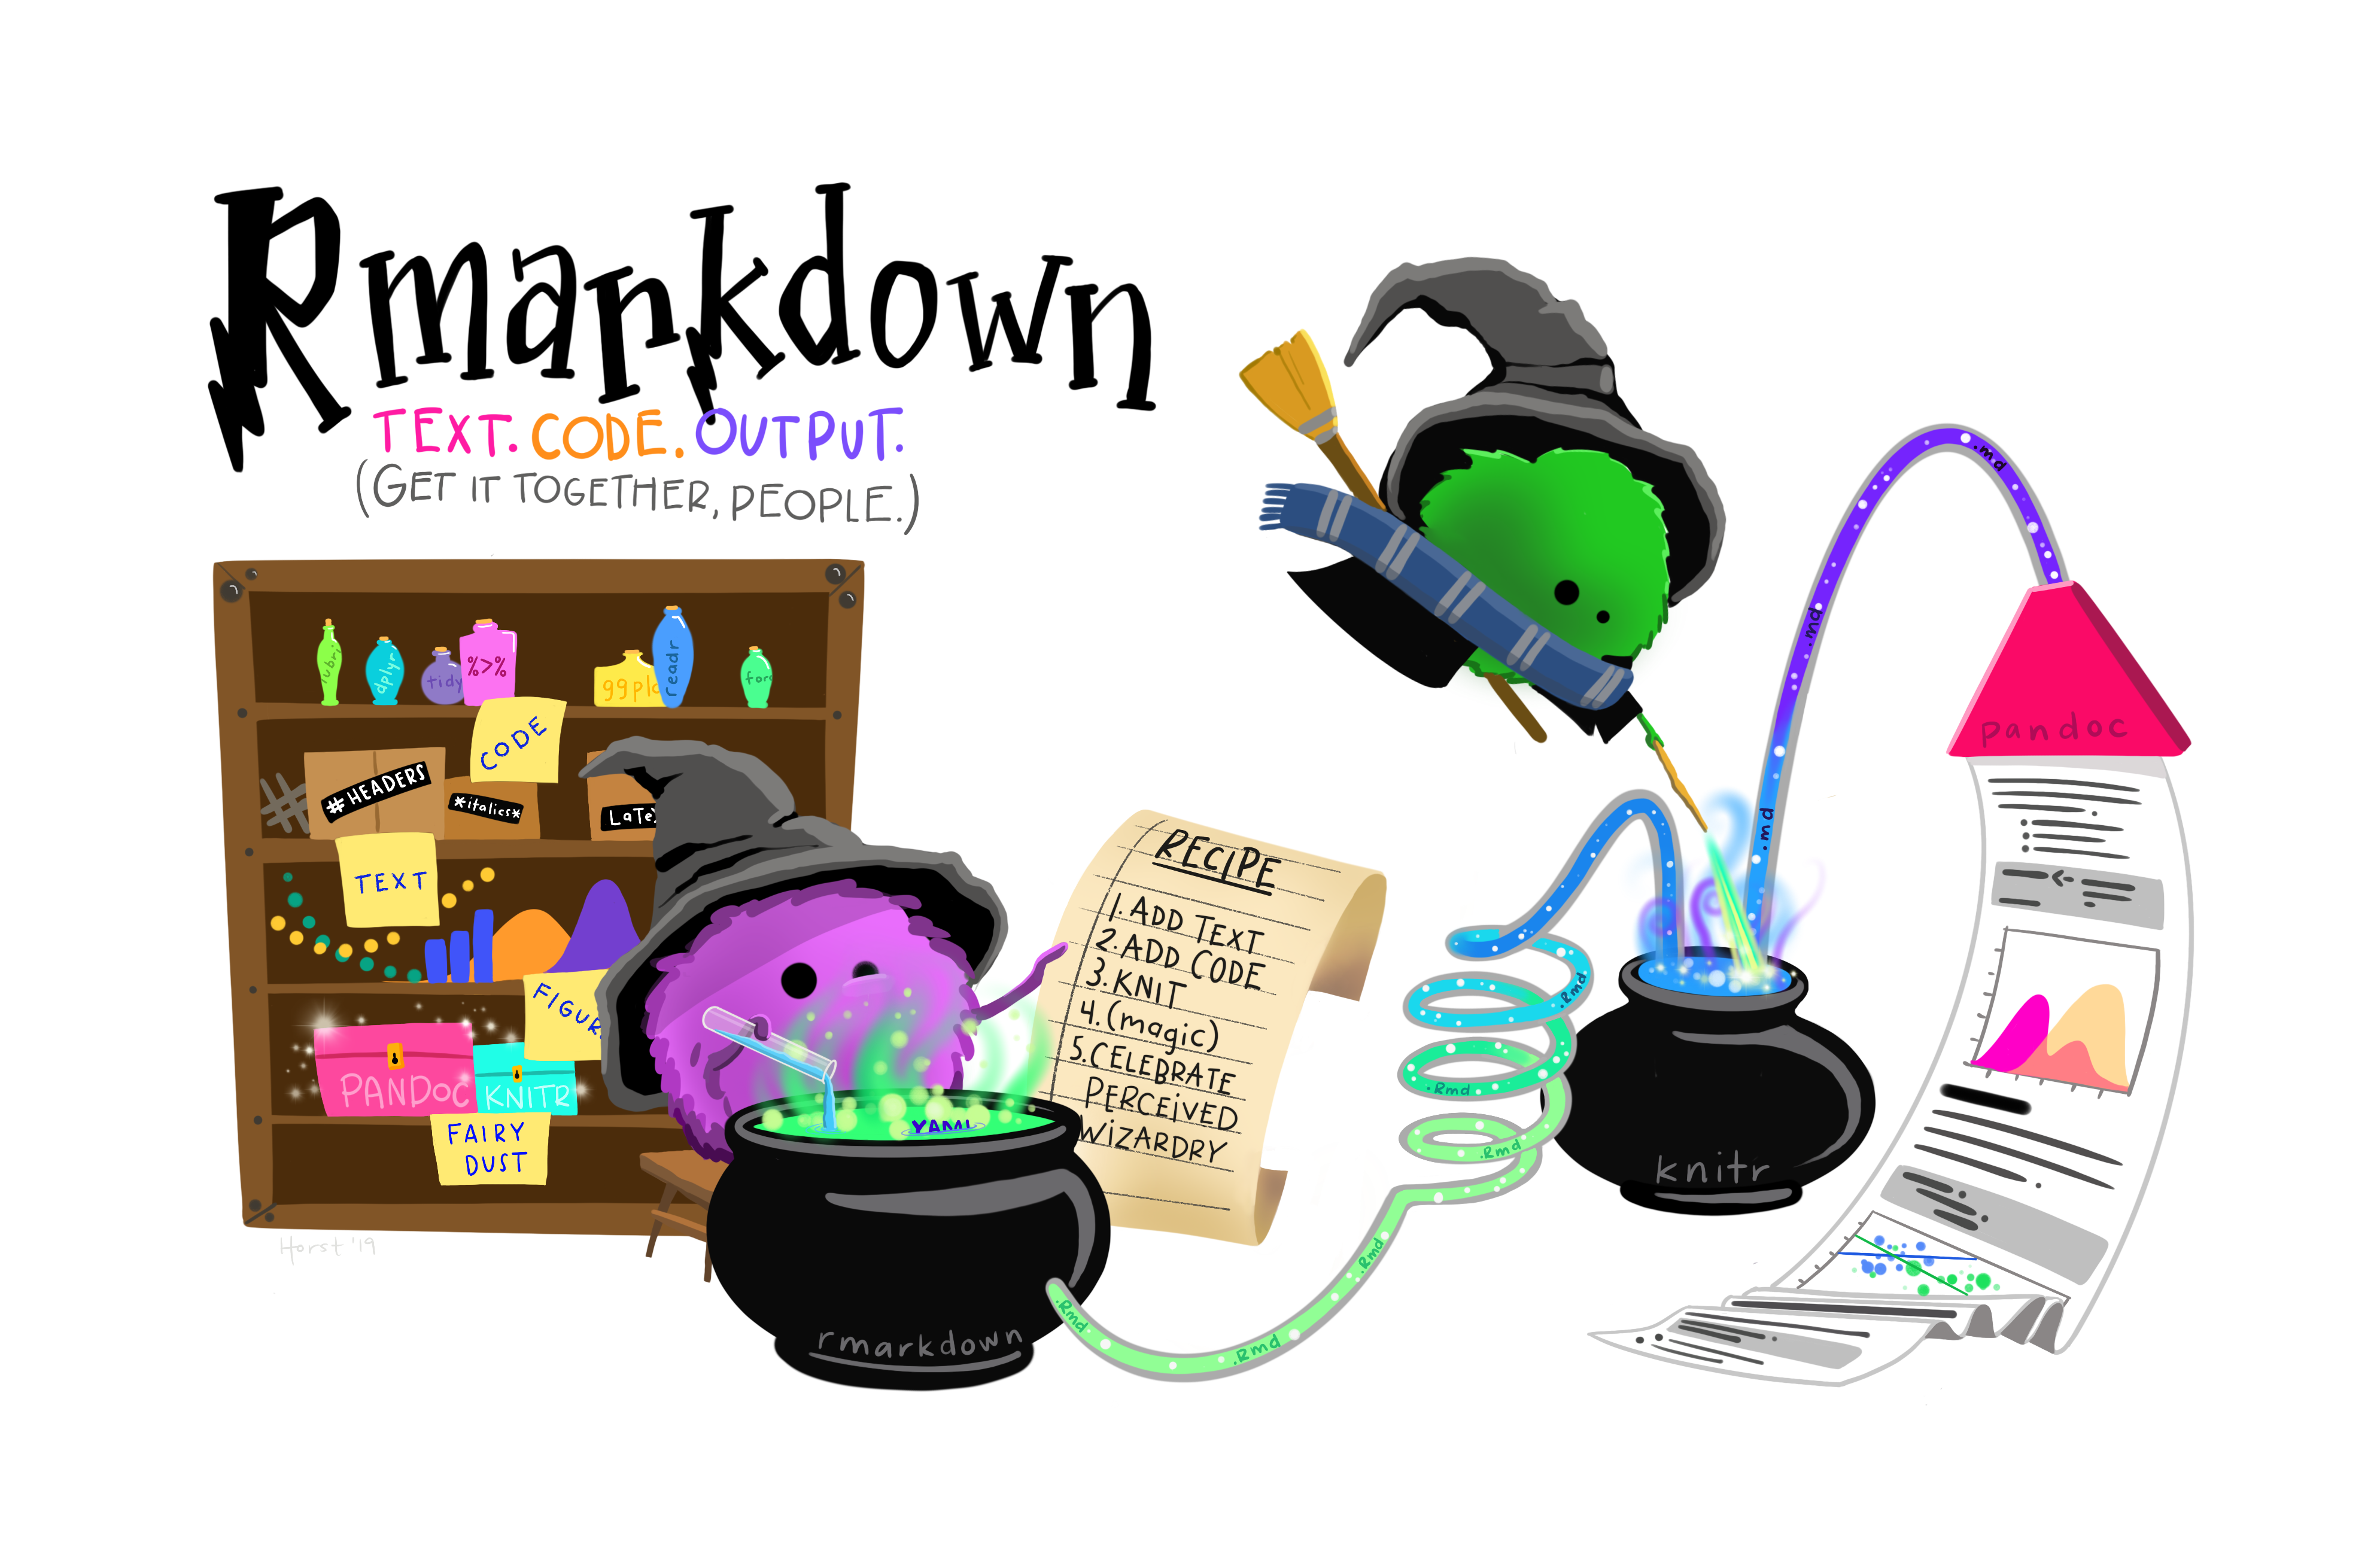 Two fuzzy round monsters dressed as wizards, working together to brew different things together from a pantry (code, text, figures, etc.) in a cauldron labeled “R Markdown”. The monster wizard at the cauldron is reading a recipe that includes steps “1. Add text. 2. Add code. 3. Knit. 4. (magic) 5. Celebrate perceived wizardry.” The R Markdown potion then travels through a tube, and is converted to markdown by a monster on a broom with a magic wand, and eventually converted to an output by pandoc. Stylized text (in a font similar to Harry Potter) reads “R Markdown. Text. Code. Output. Get it together, people.